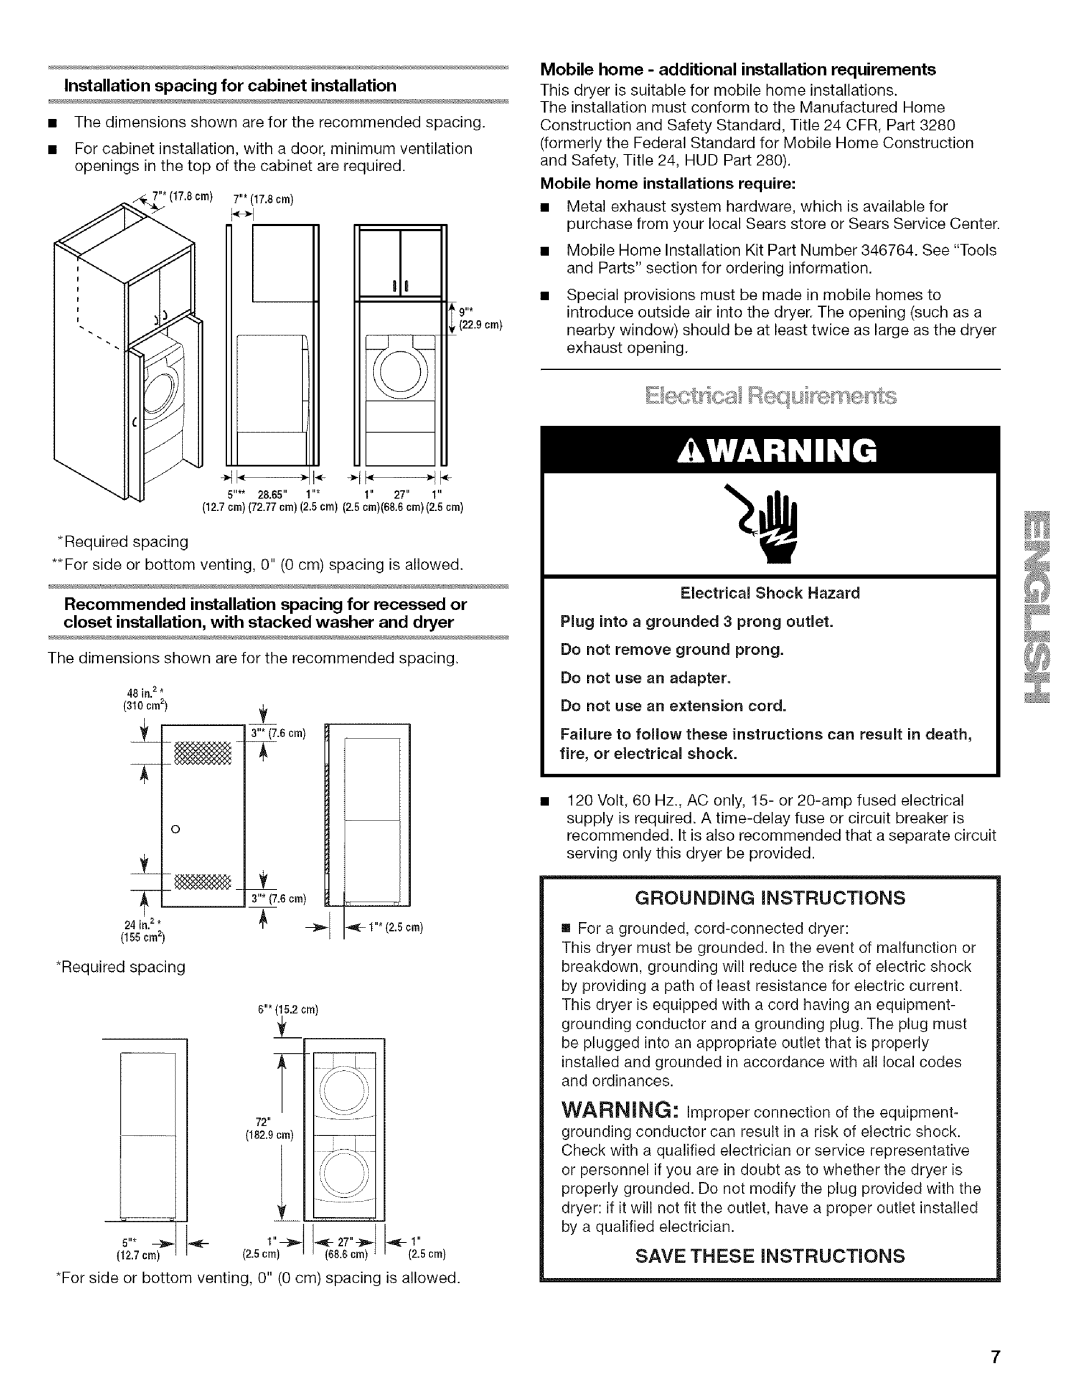 Kenmore 9758, 9757, 110.9756 GROUNDING iNSTRUCTiONS, Save These Instructions, Installation spacing for cabinet installation 